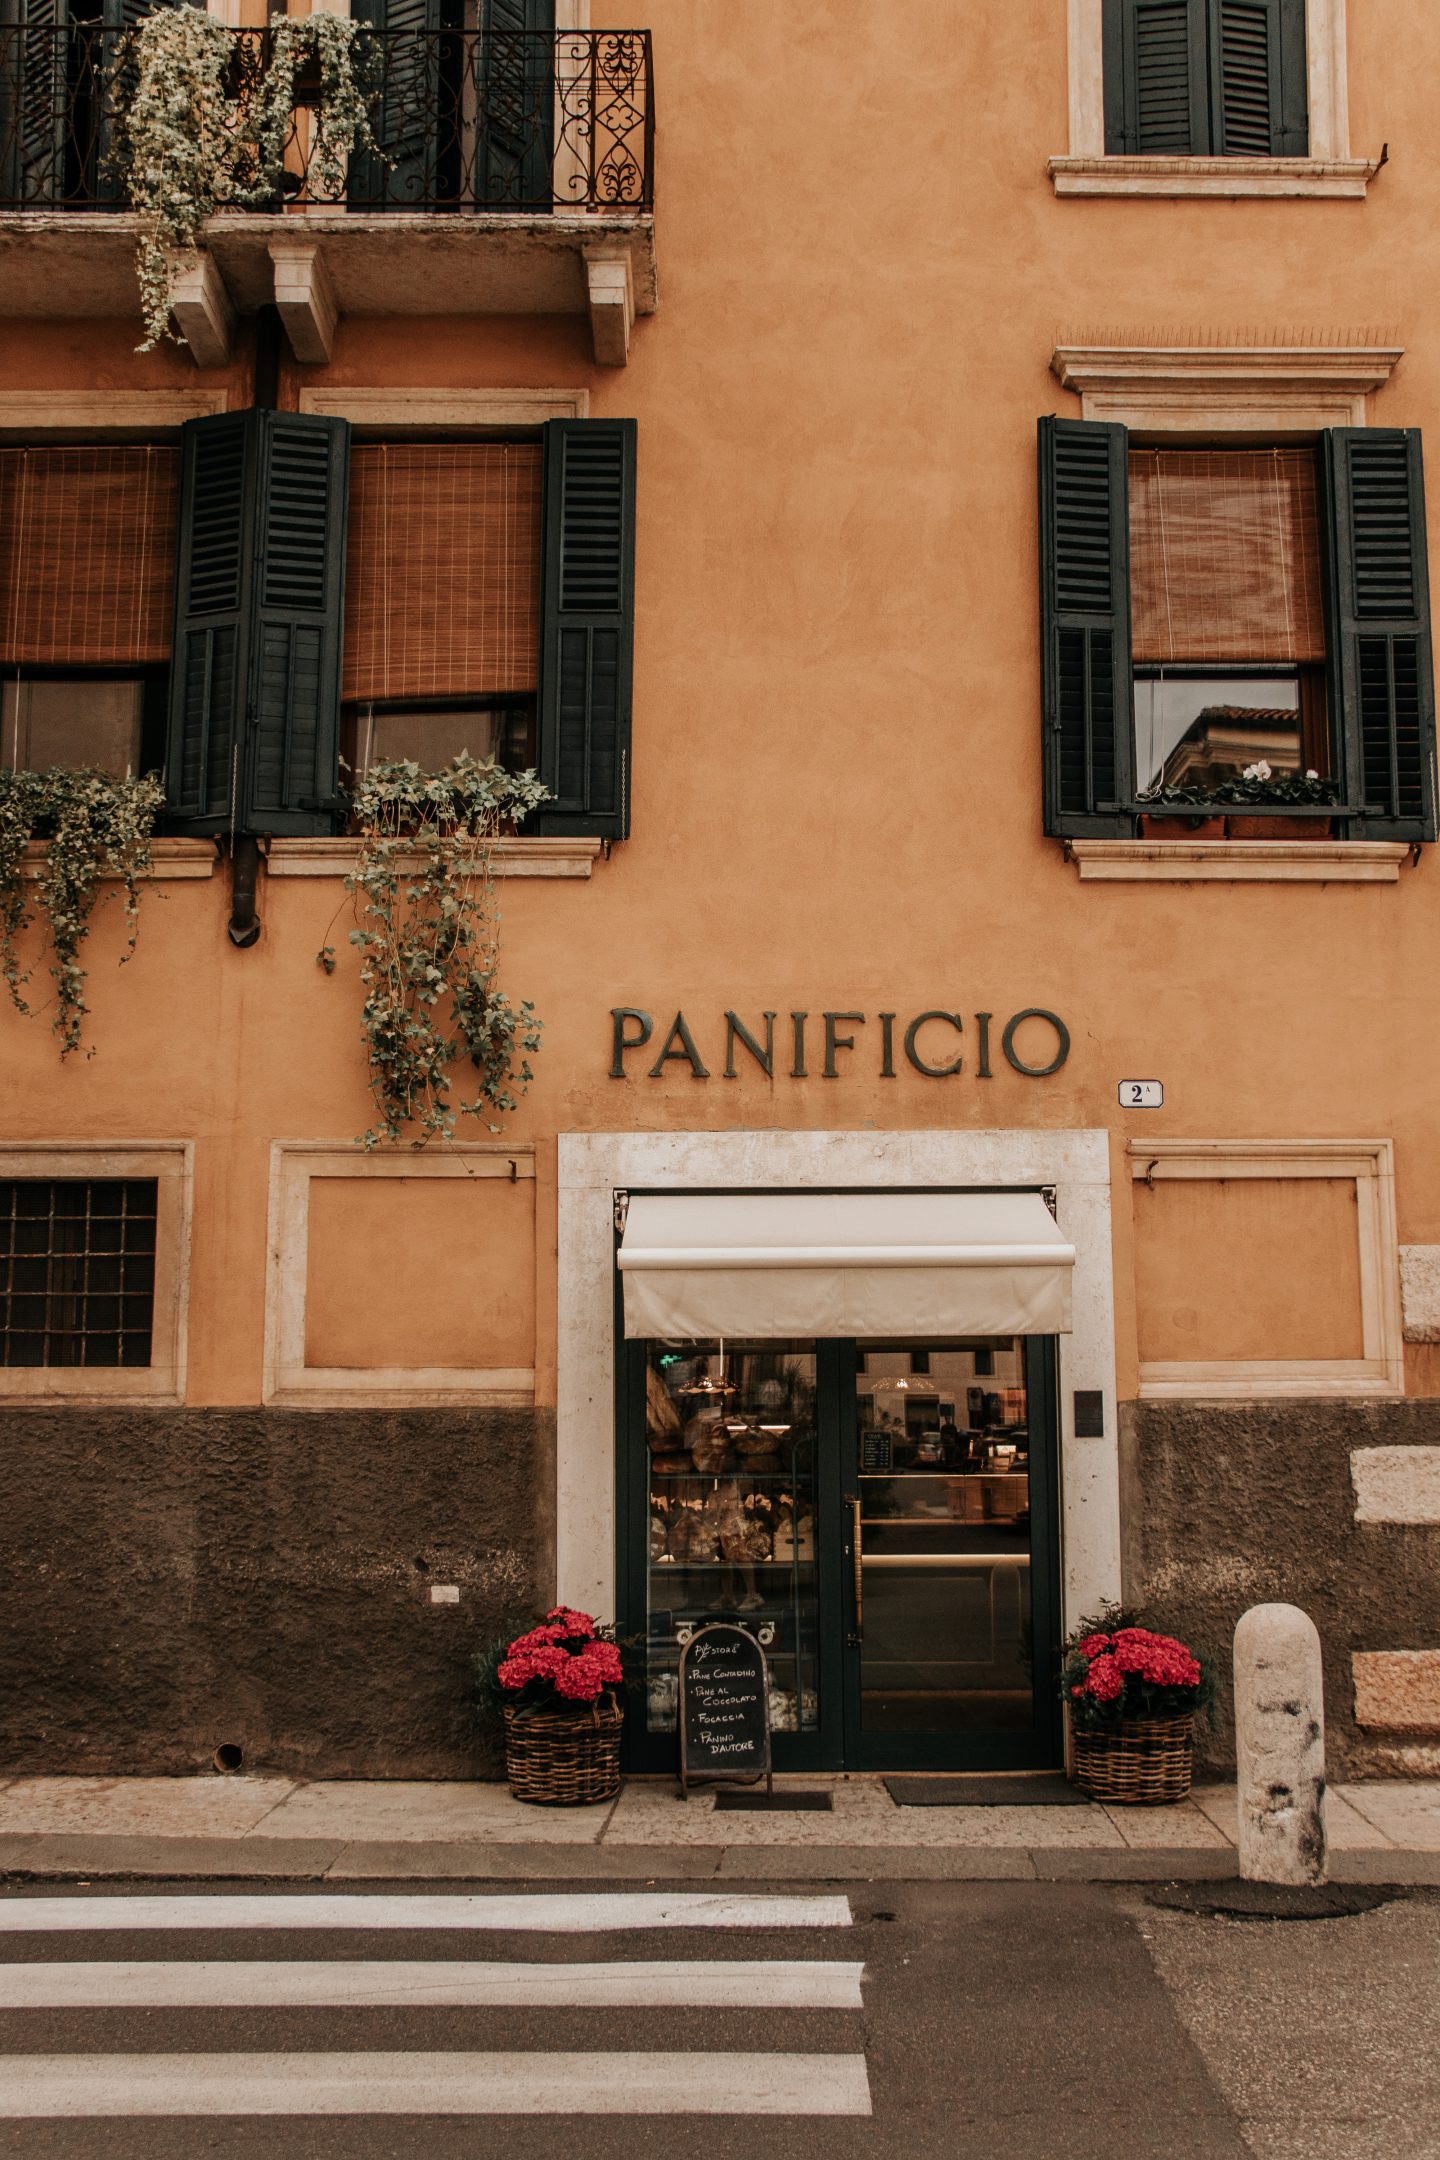 A bakery depicts a part of daily life in Italy